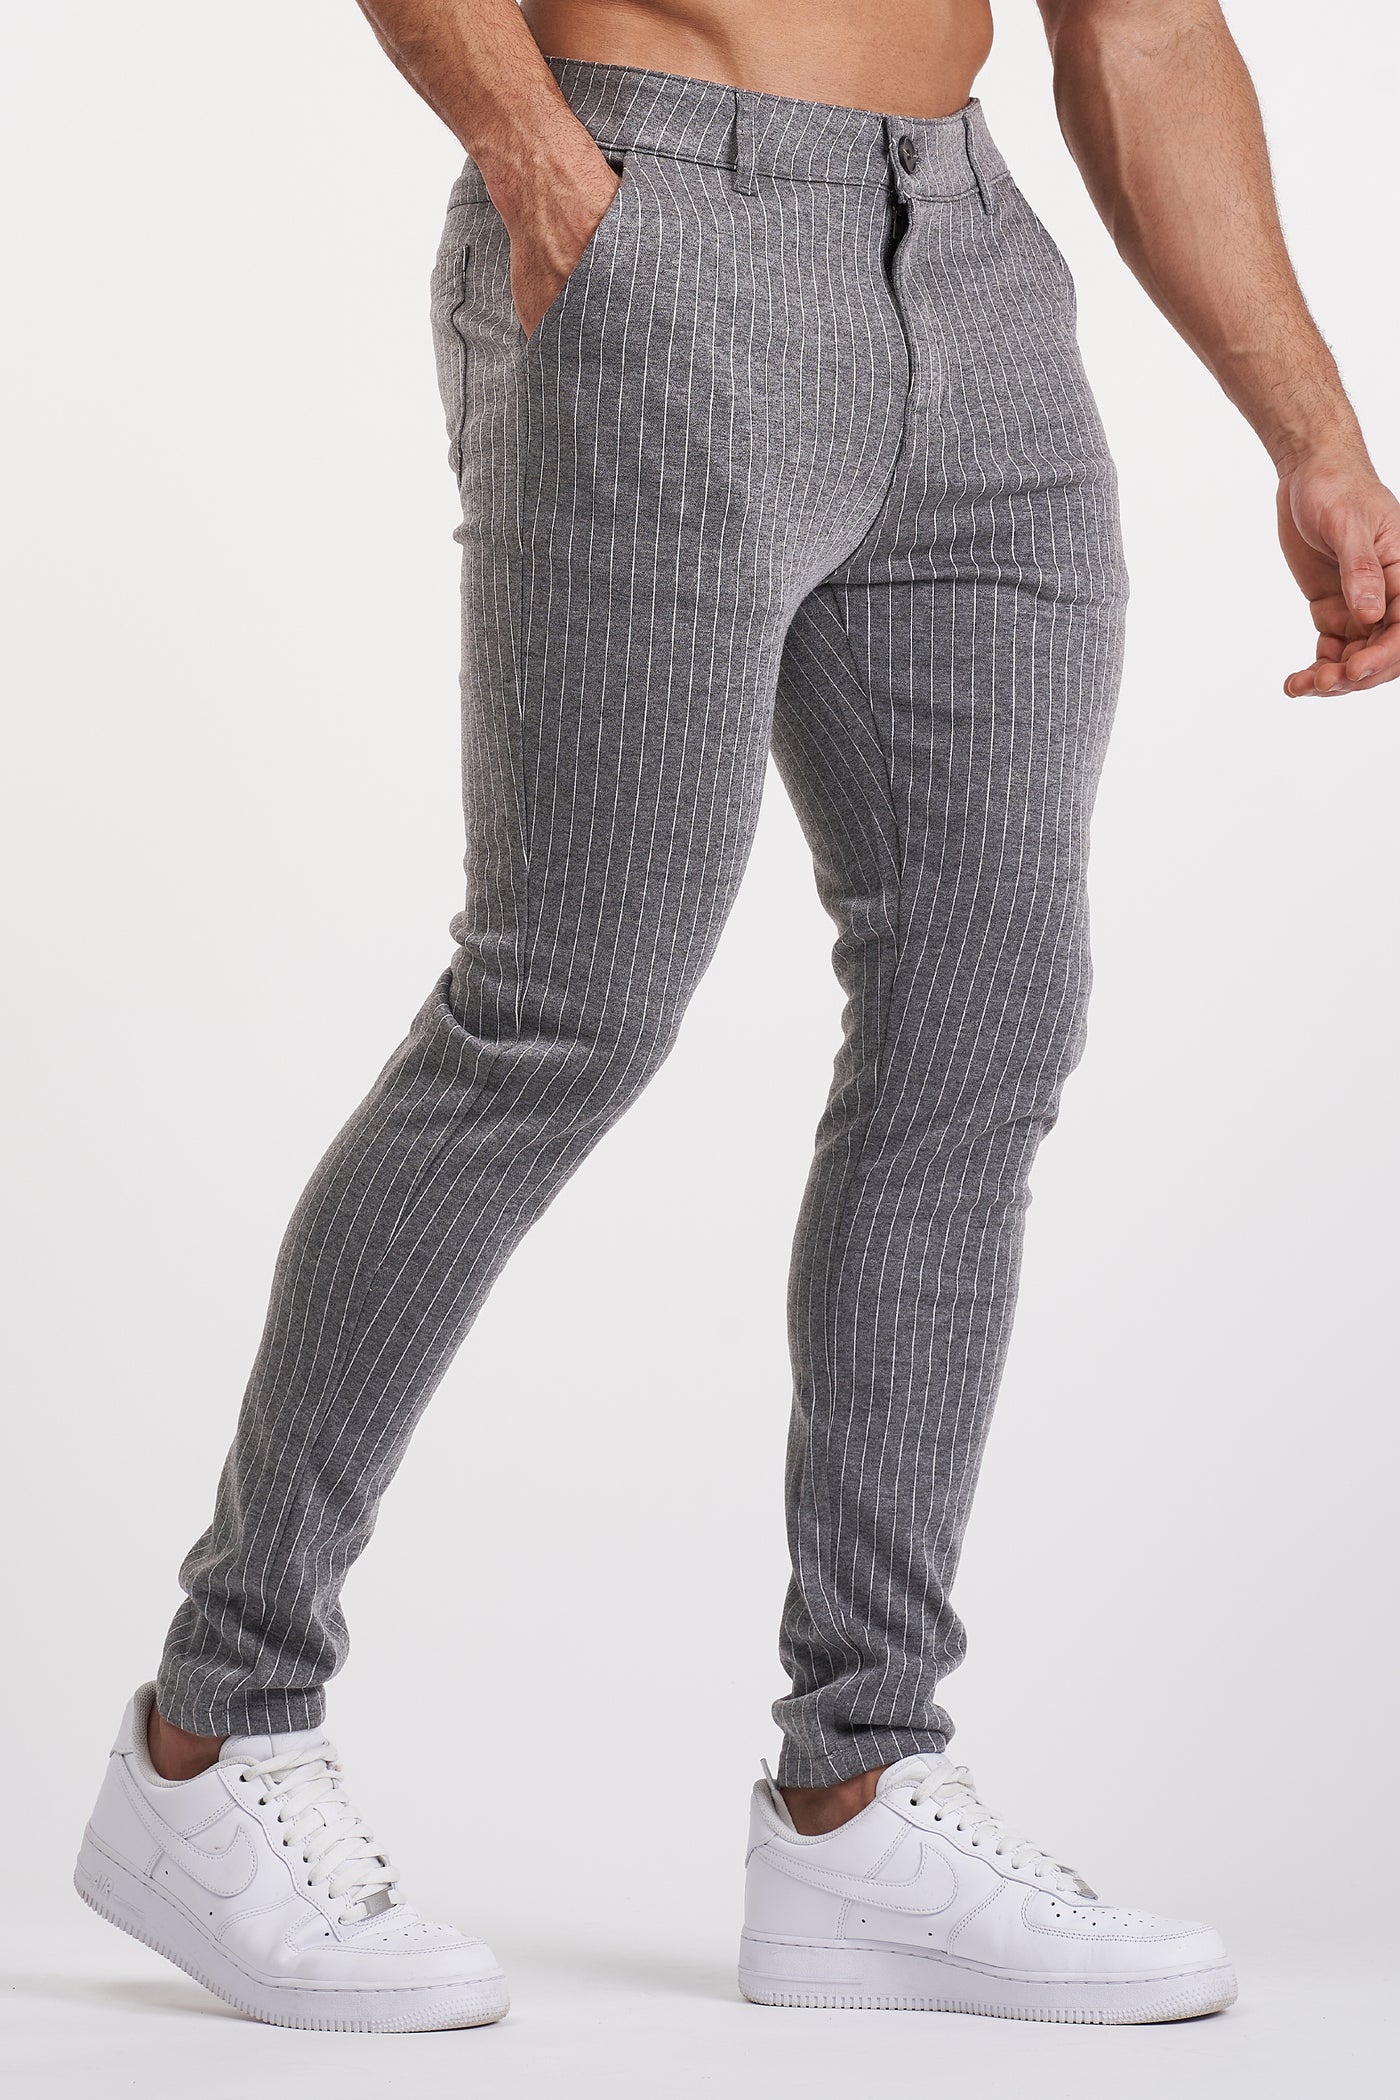 THE NOCO TROUSERS - GREY - ICON. AMSTERDAM